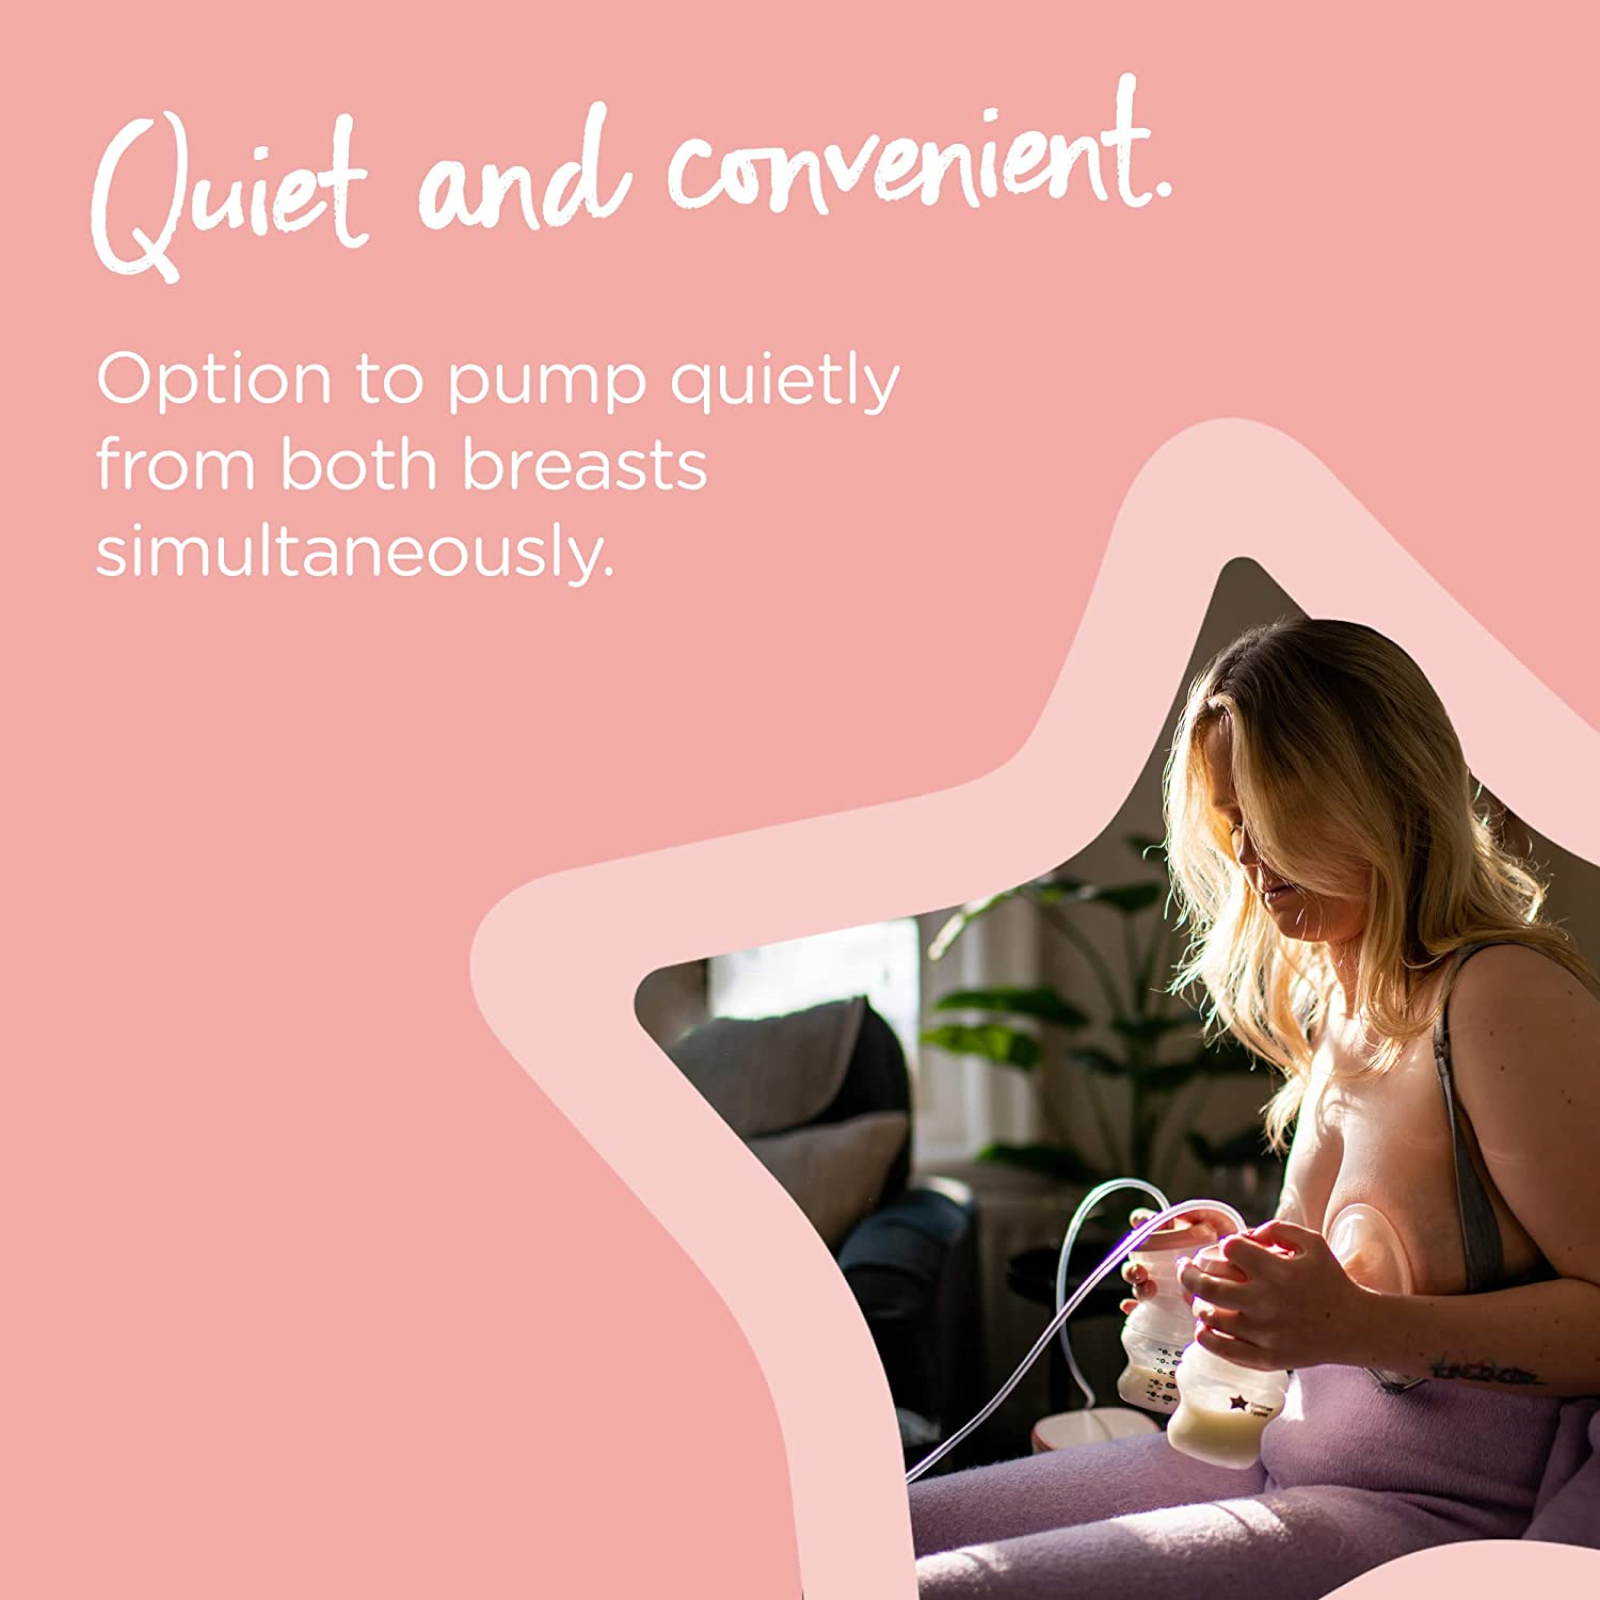 Tommee_Tippee_Double_Electric_Breast_Pump